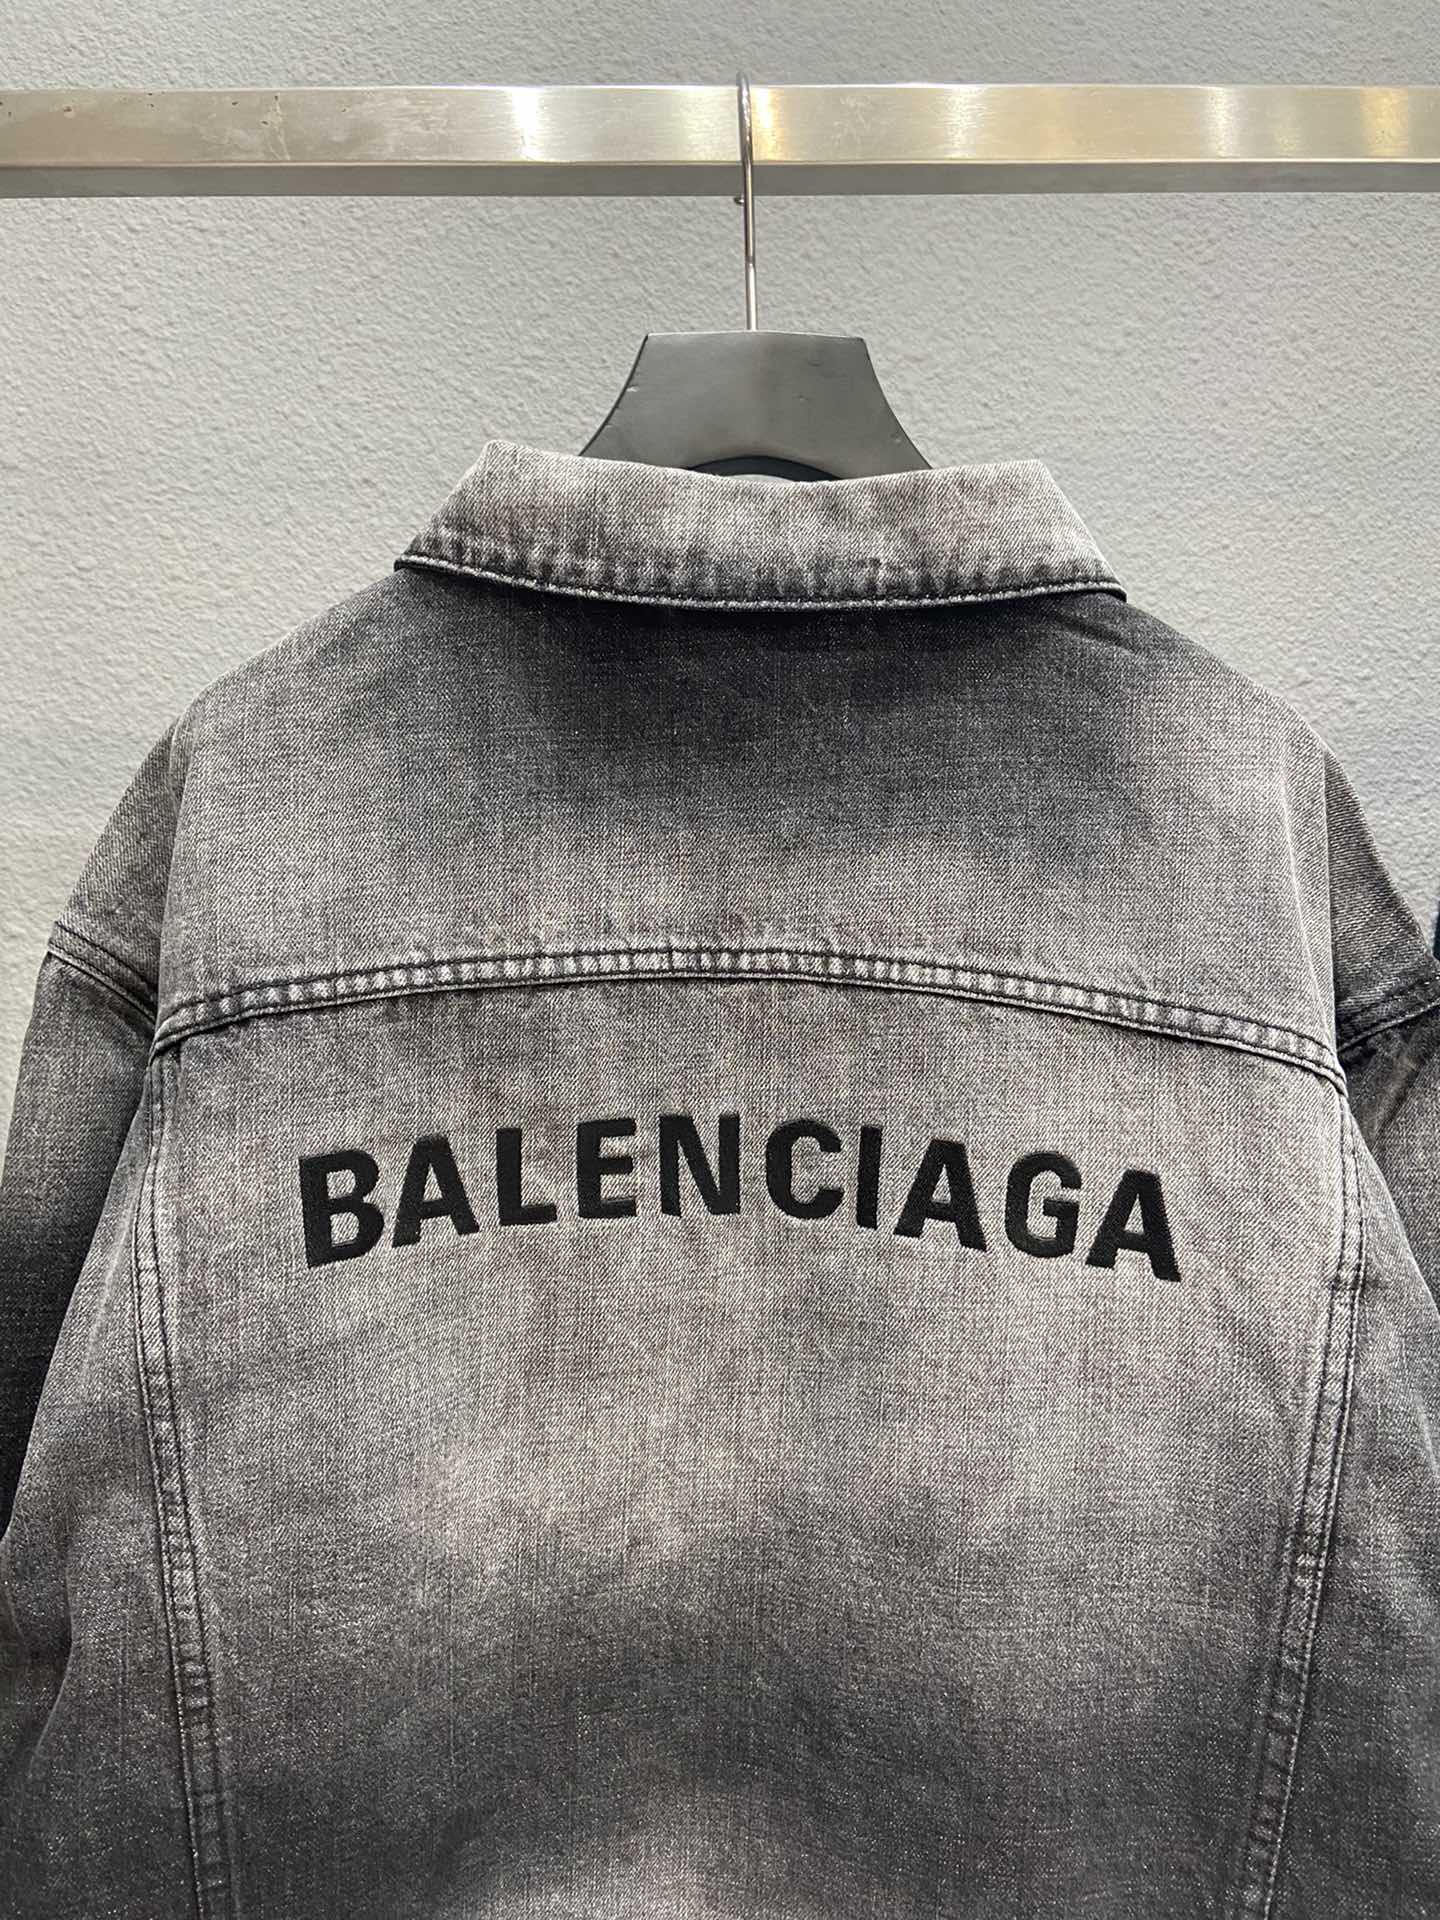 Balenciaga Graffiti Baggy Pants  Oversized Jacket Pics fashionlab181  Pants come in a few different colors Not much is arriving  Instagram